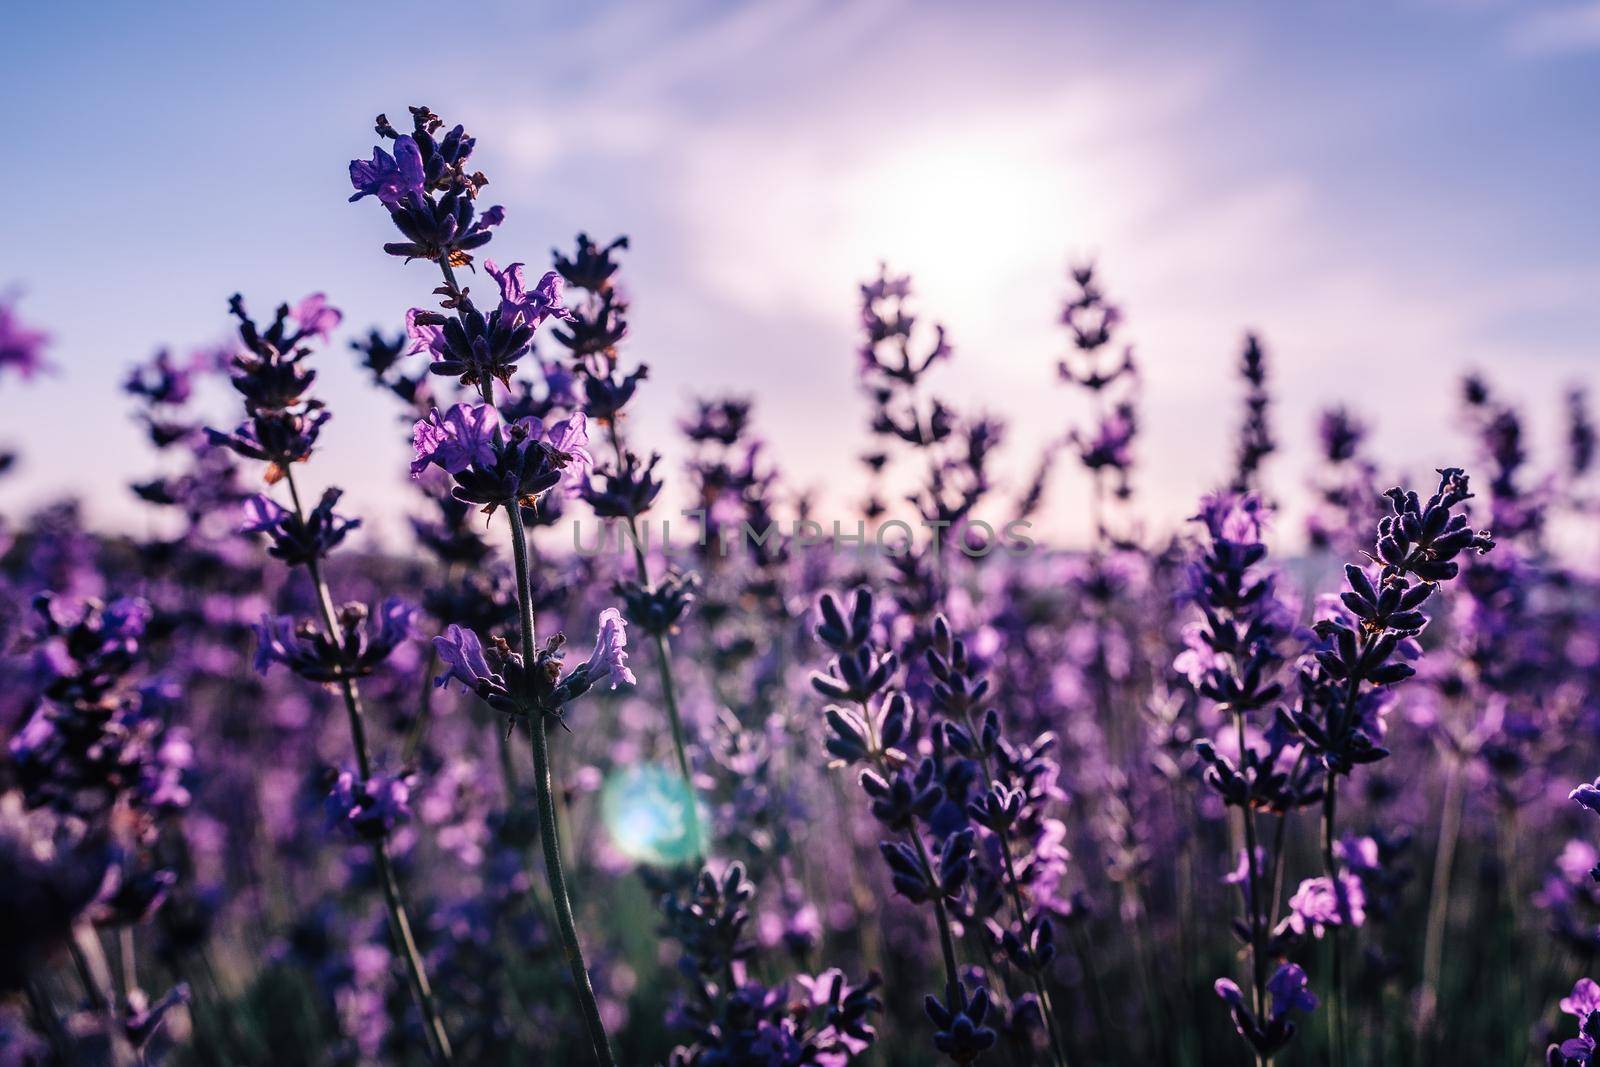 Close up Lavender flower blooming scented fields in endless rows on sunset. Selective focus on Bushes of lavender purple aromatic flowers at lavender fields Abstract blur for background. by panophotograph